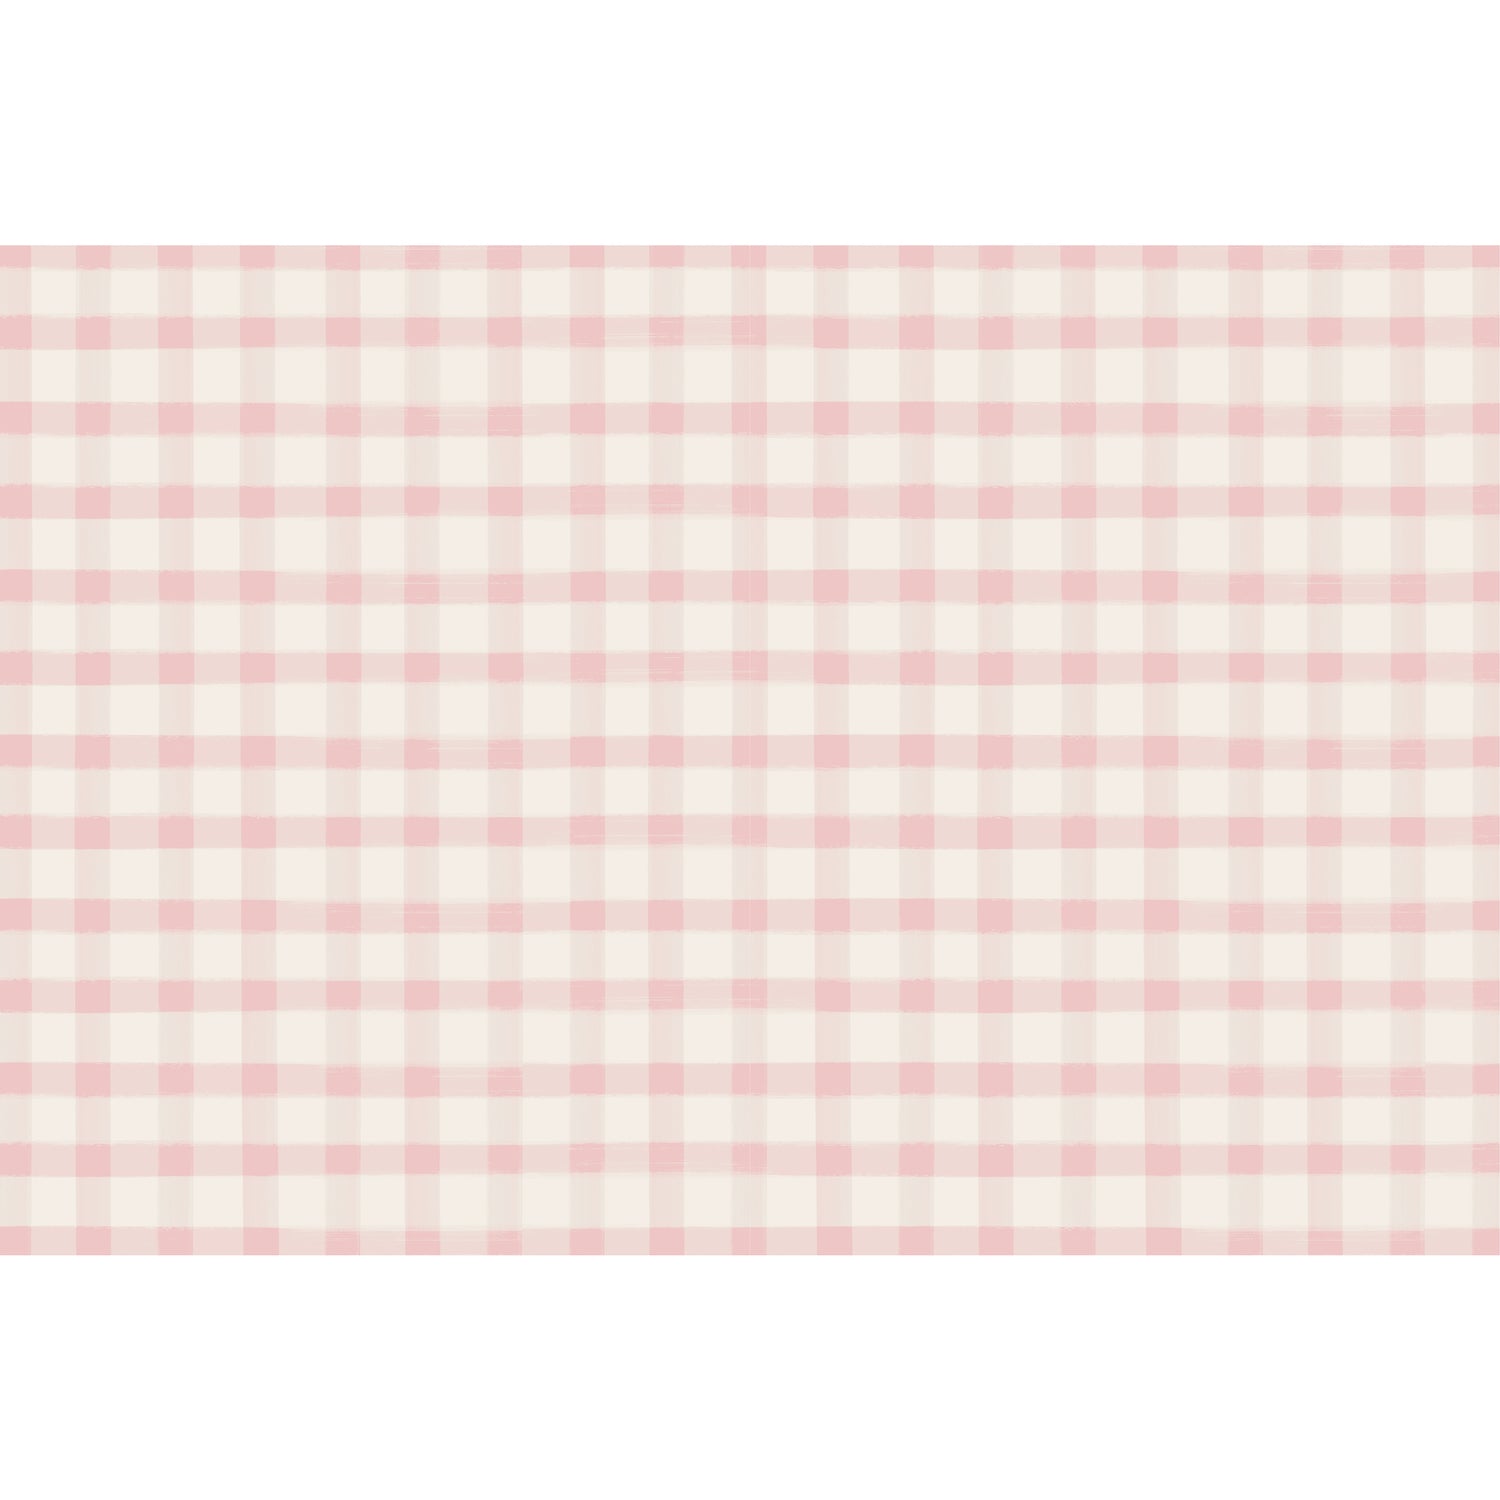 A painted gingham grid check pattern made of light pink lines intersecting at pink squares, on a white background.